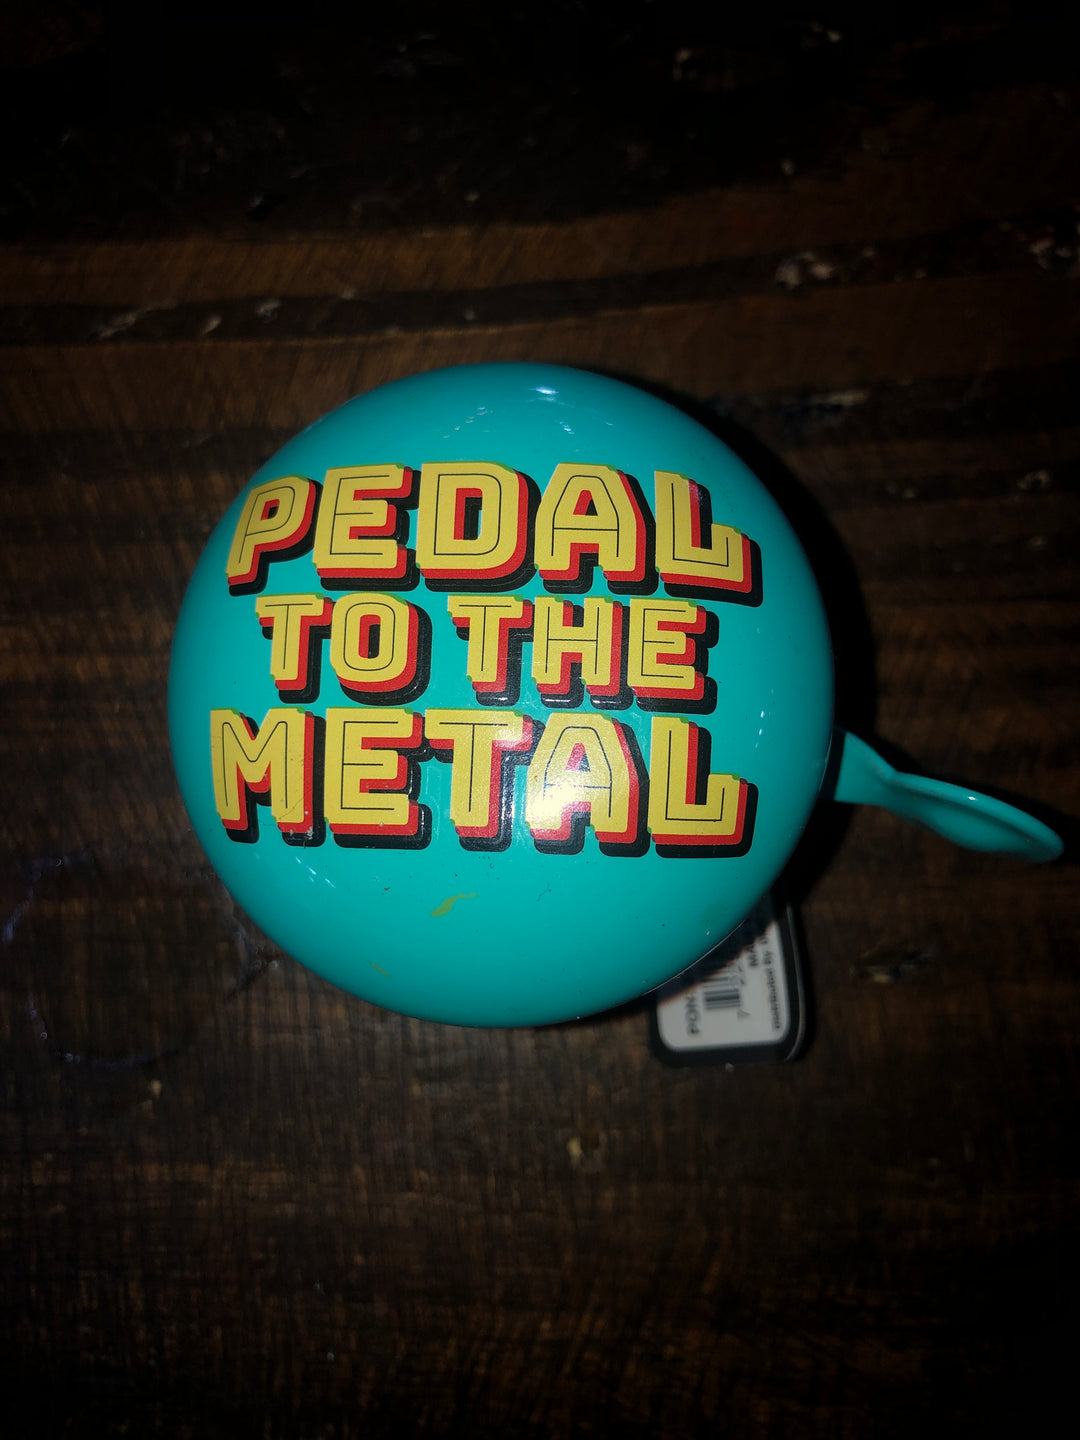 Bicycle Bell